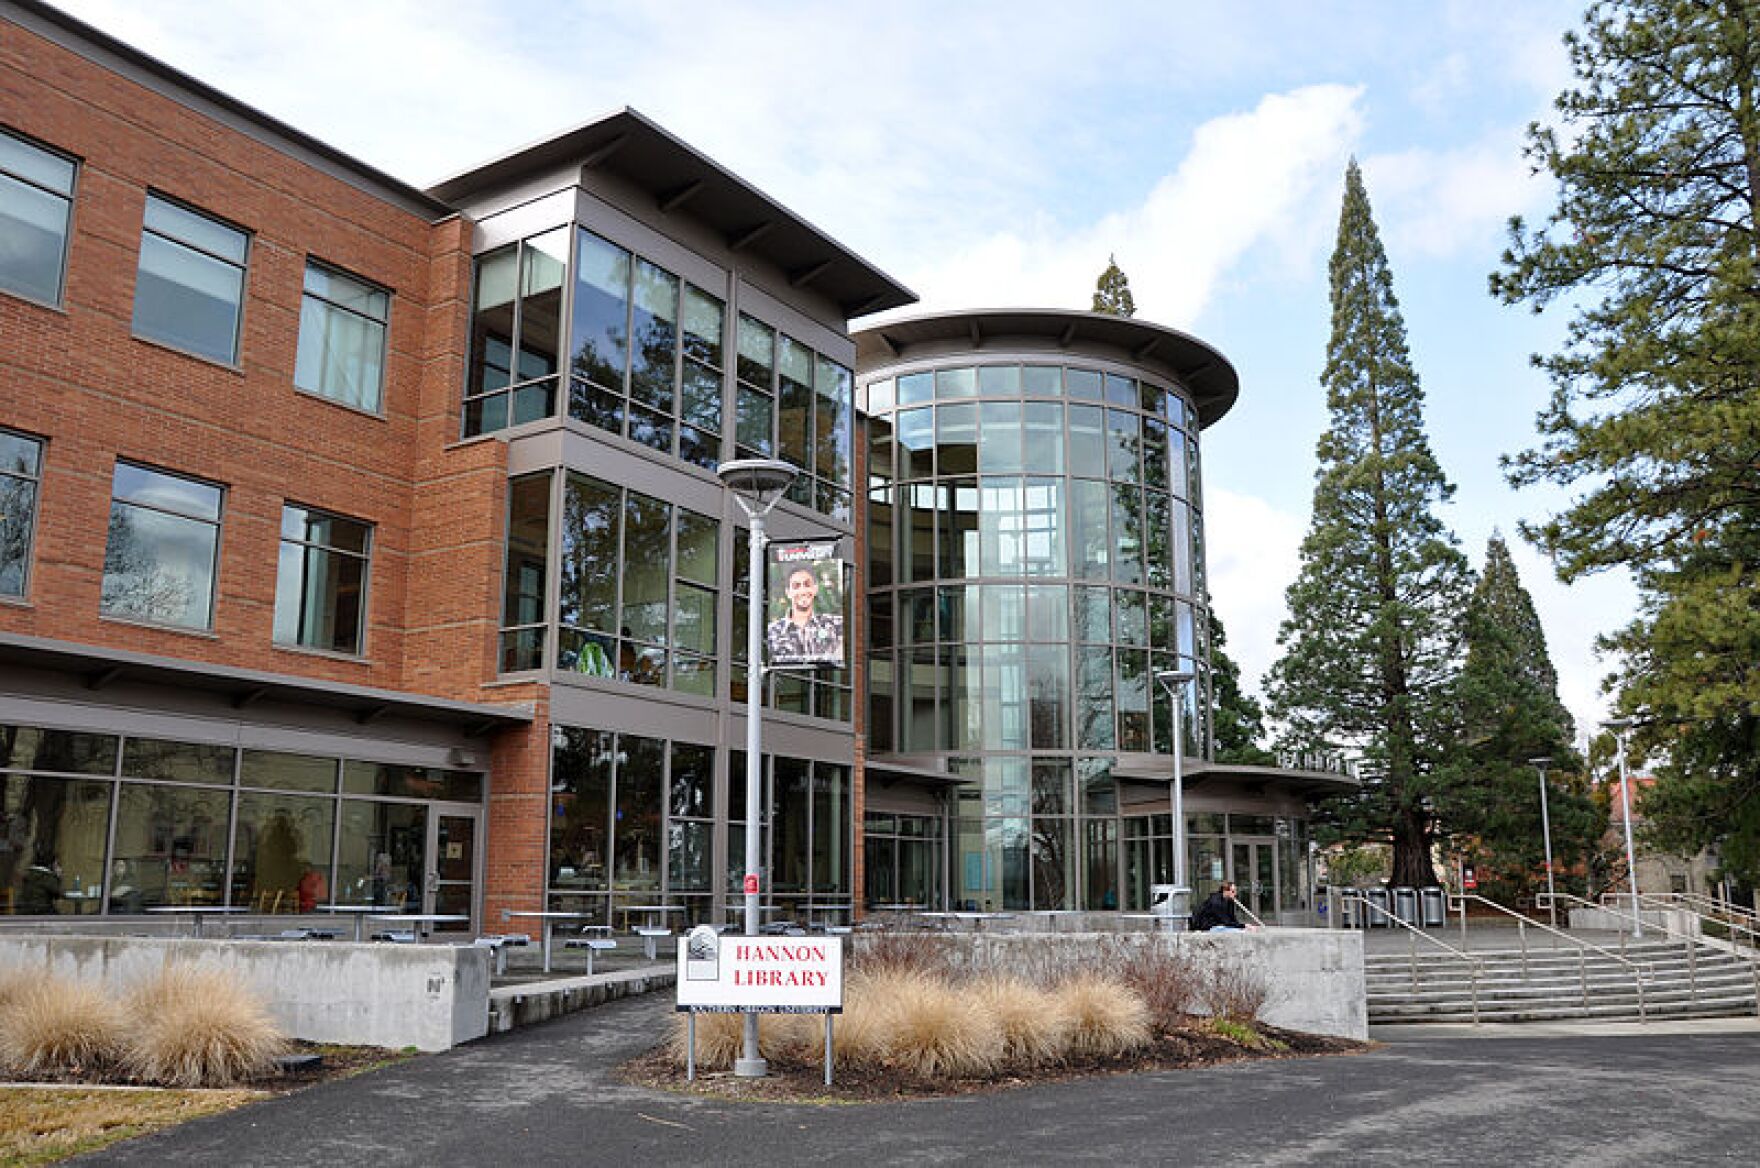 SOU faculty, administration reach tentative agreement on contract